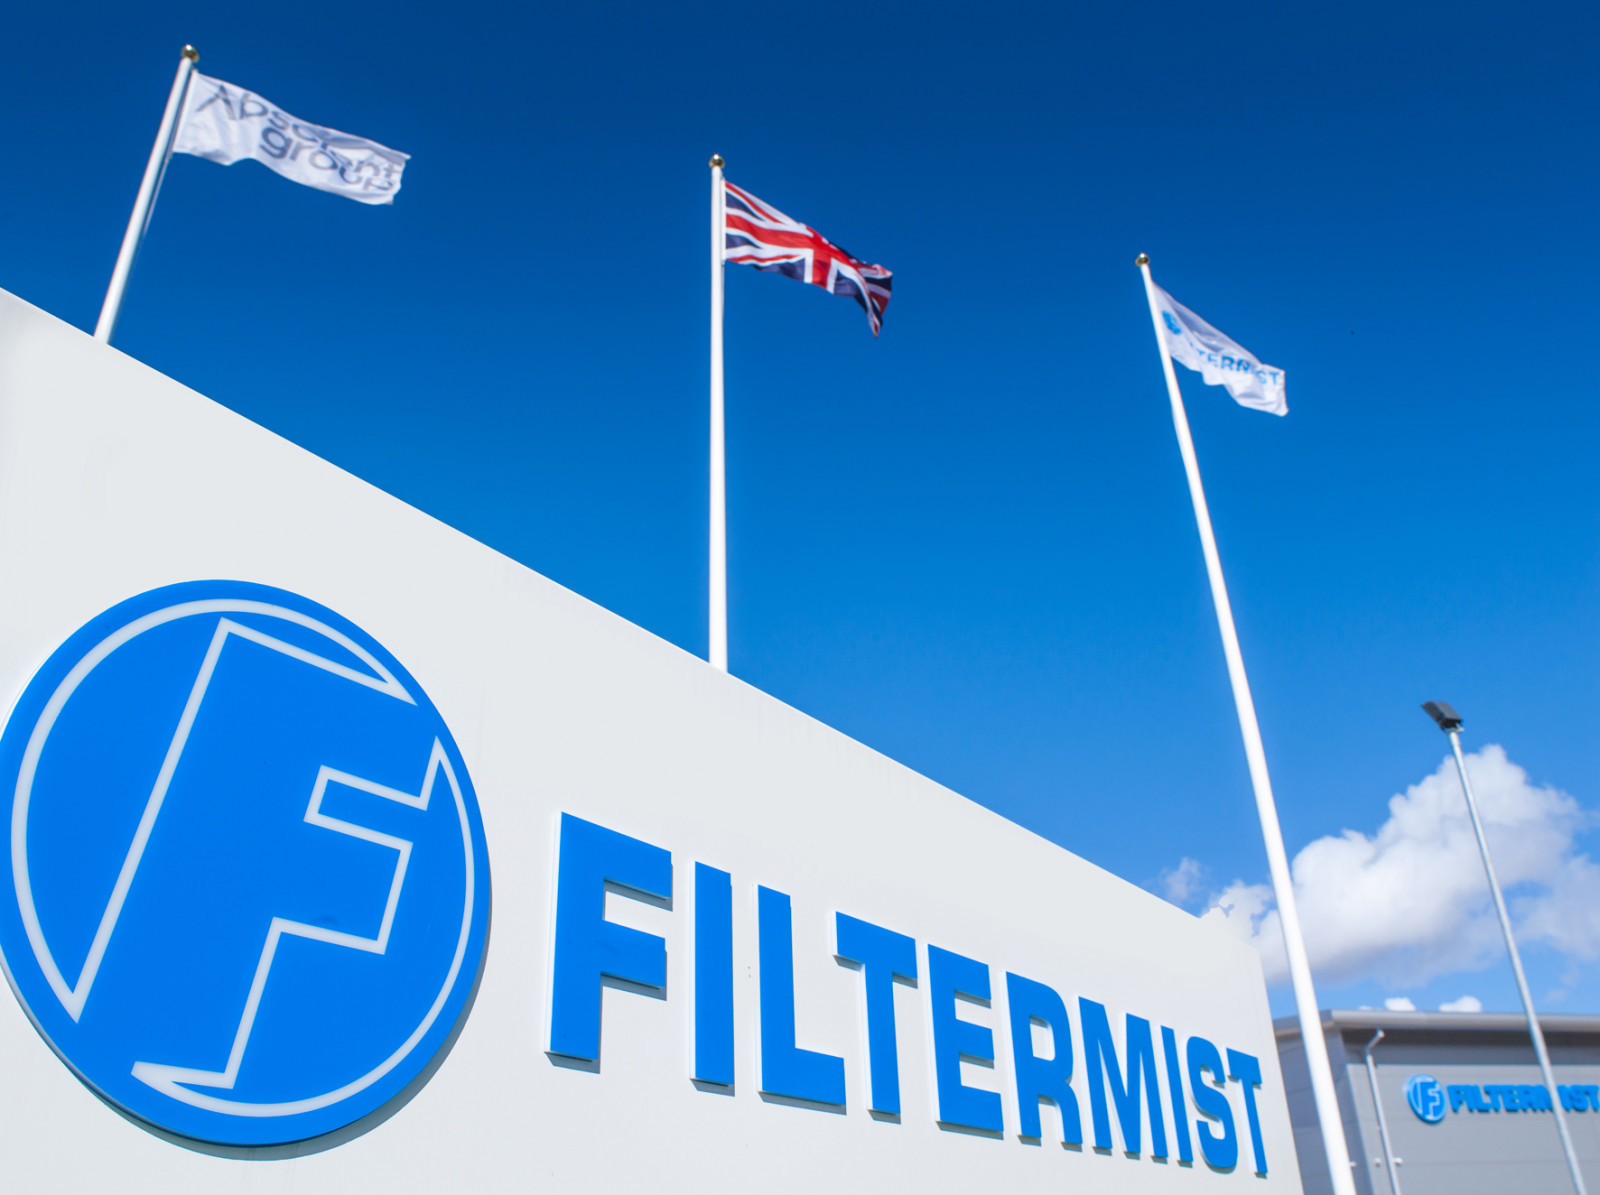 Introducing Filtermist to Made in the Midlands